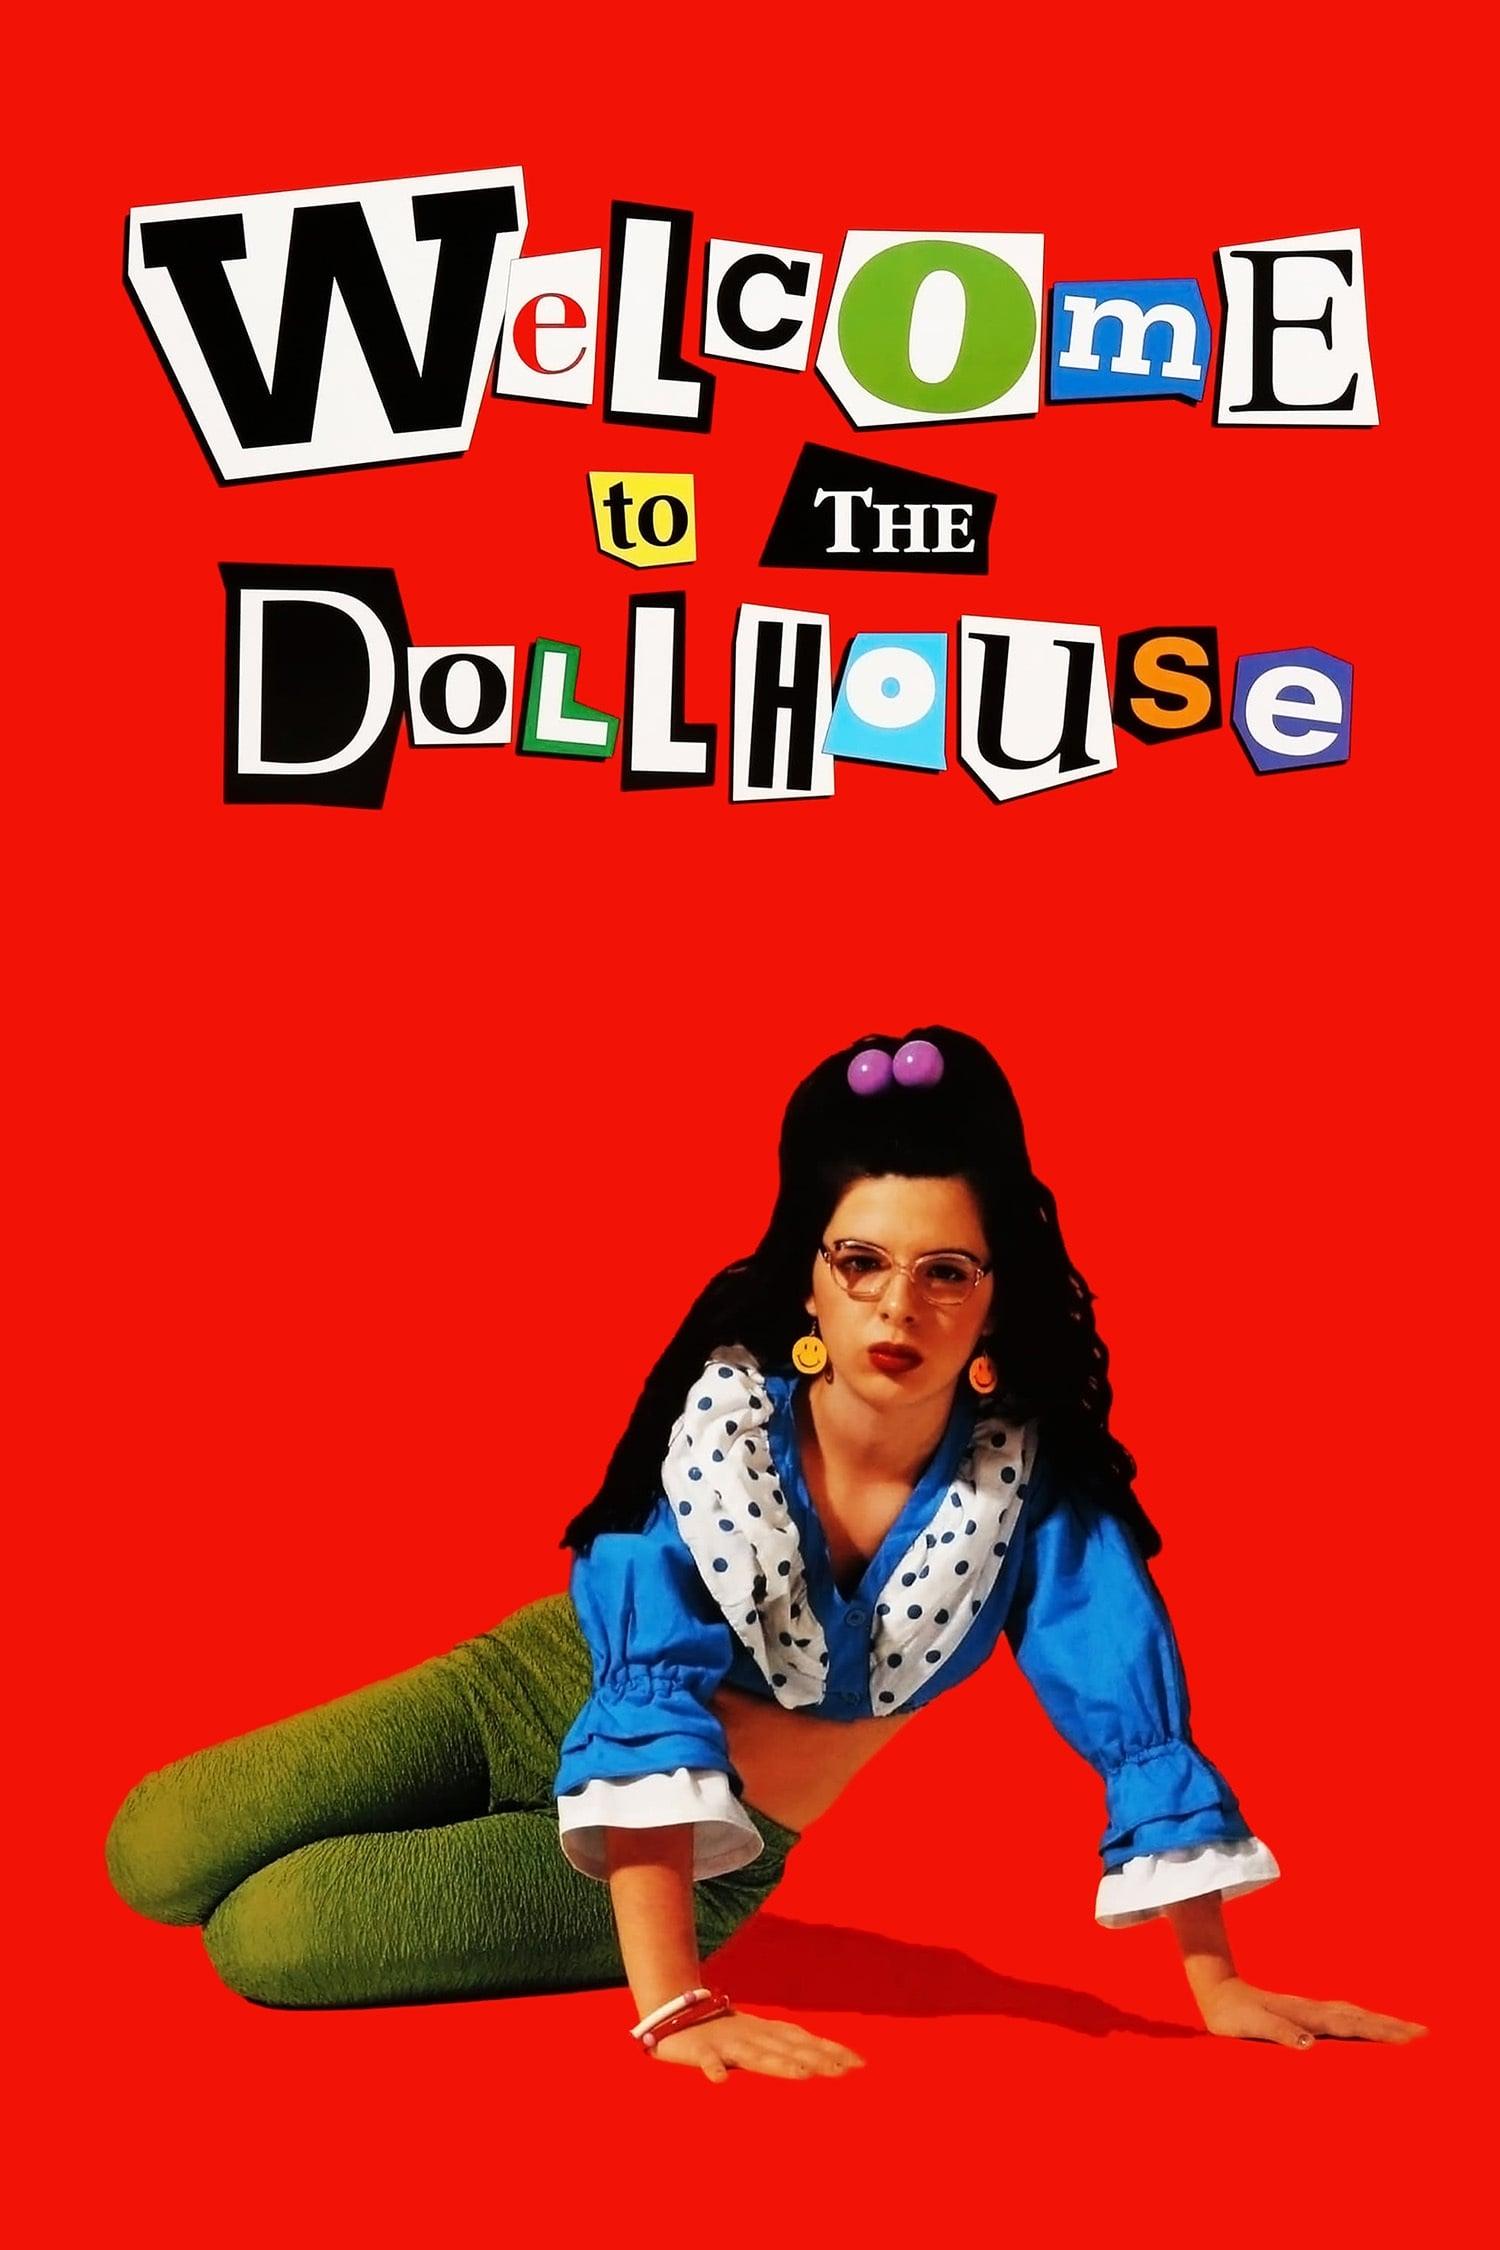 Welcome to the Dollhouse poster